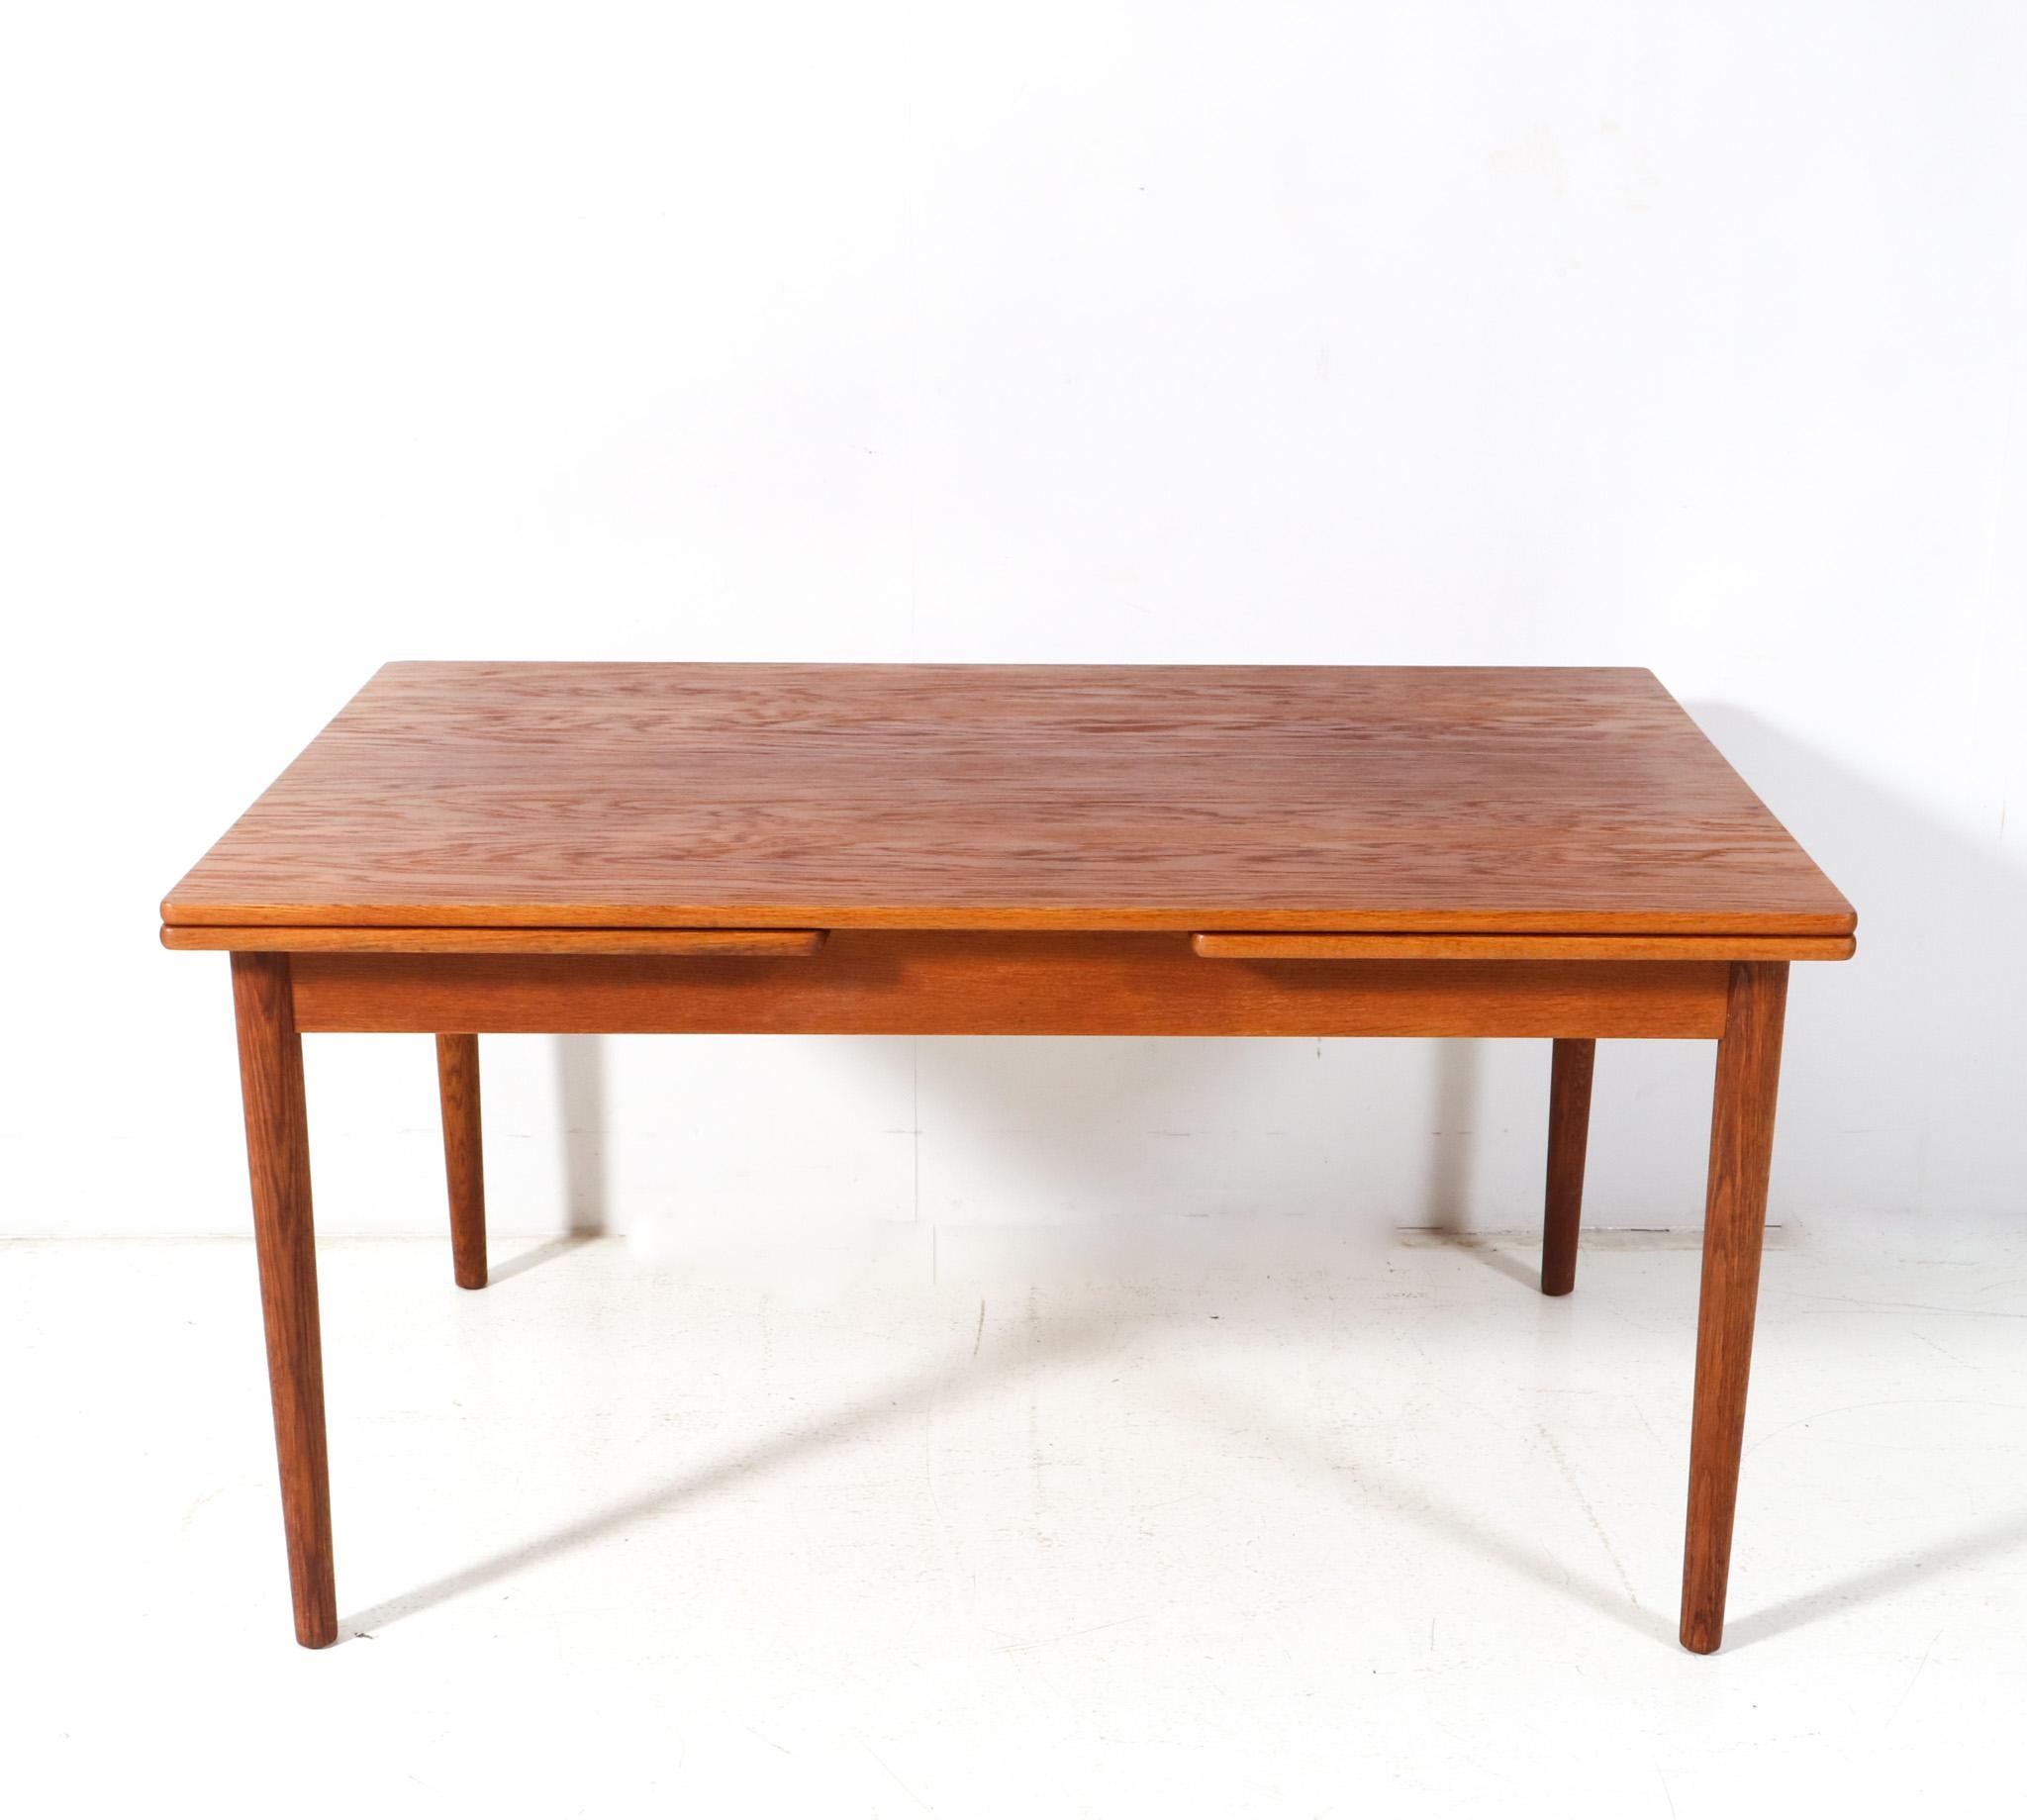 Stunning and rare Mid-Century Modern Mo. 215 extendable dining room table.
Design by Farstrup Denmark.
Striking Danish design from the 1960s.
Solid teak round tapered legs with original teak veneered top and two original teak veneered